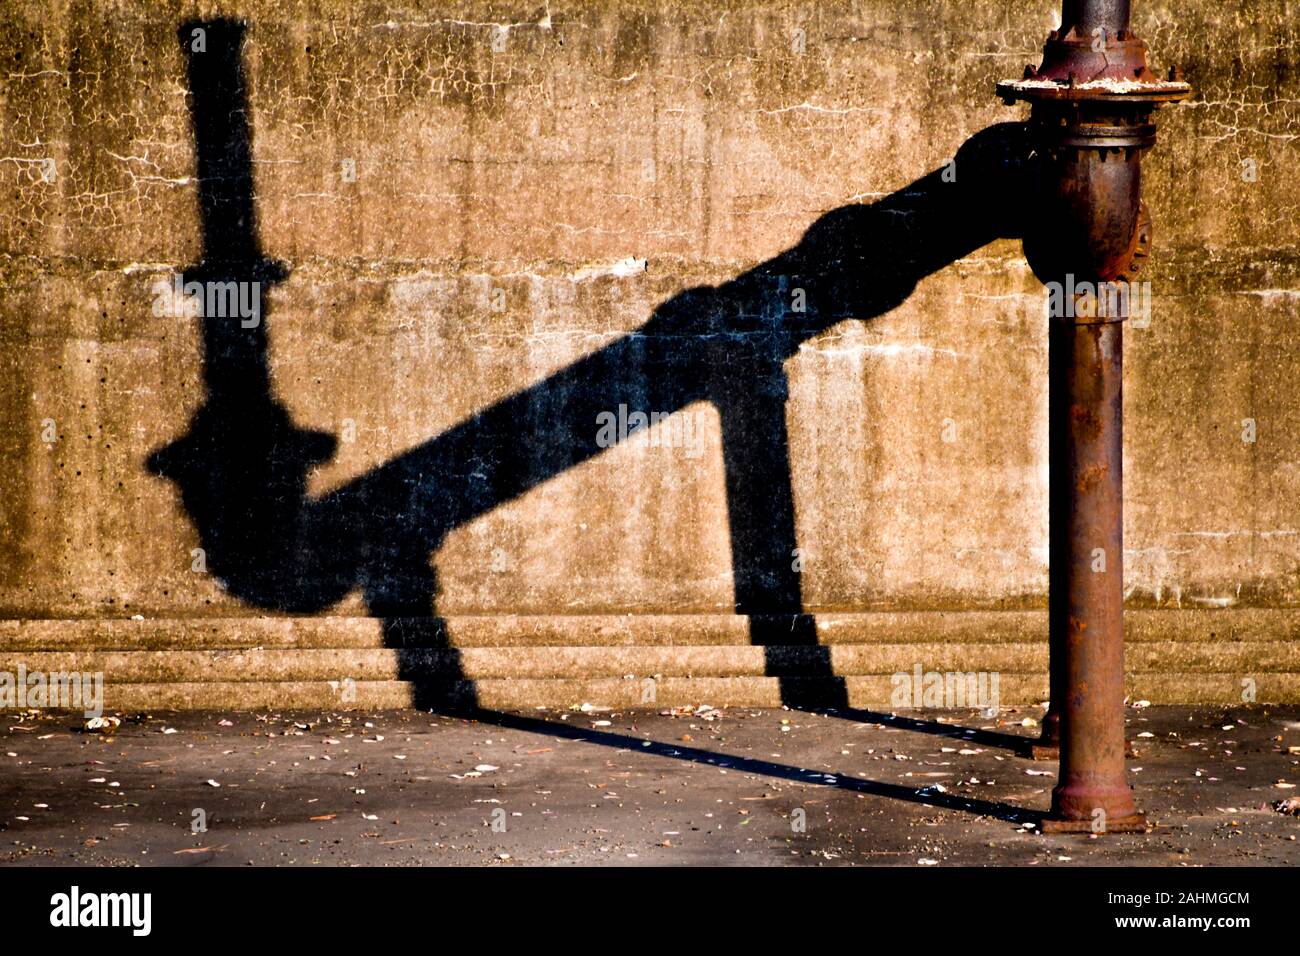 Abandoned former Victorian Era Industrial Site, Walka Water Works, cast iron water pipe casting shadow in settling pond, Maitland, Australia Stock Photo